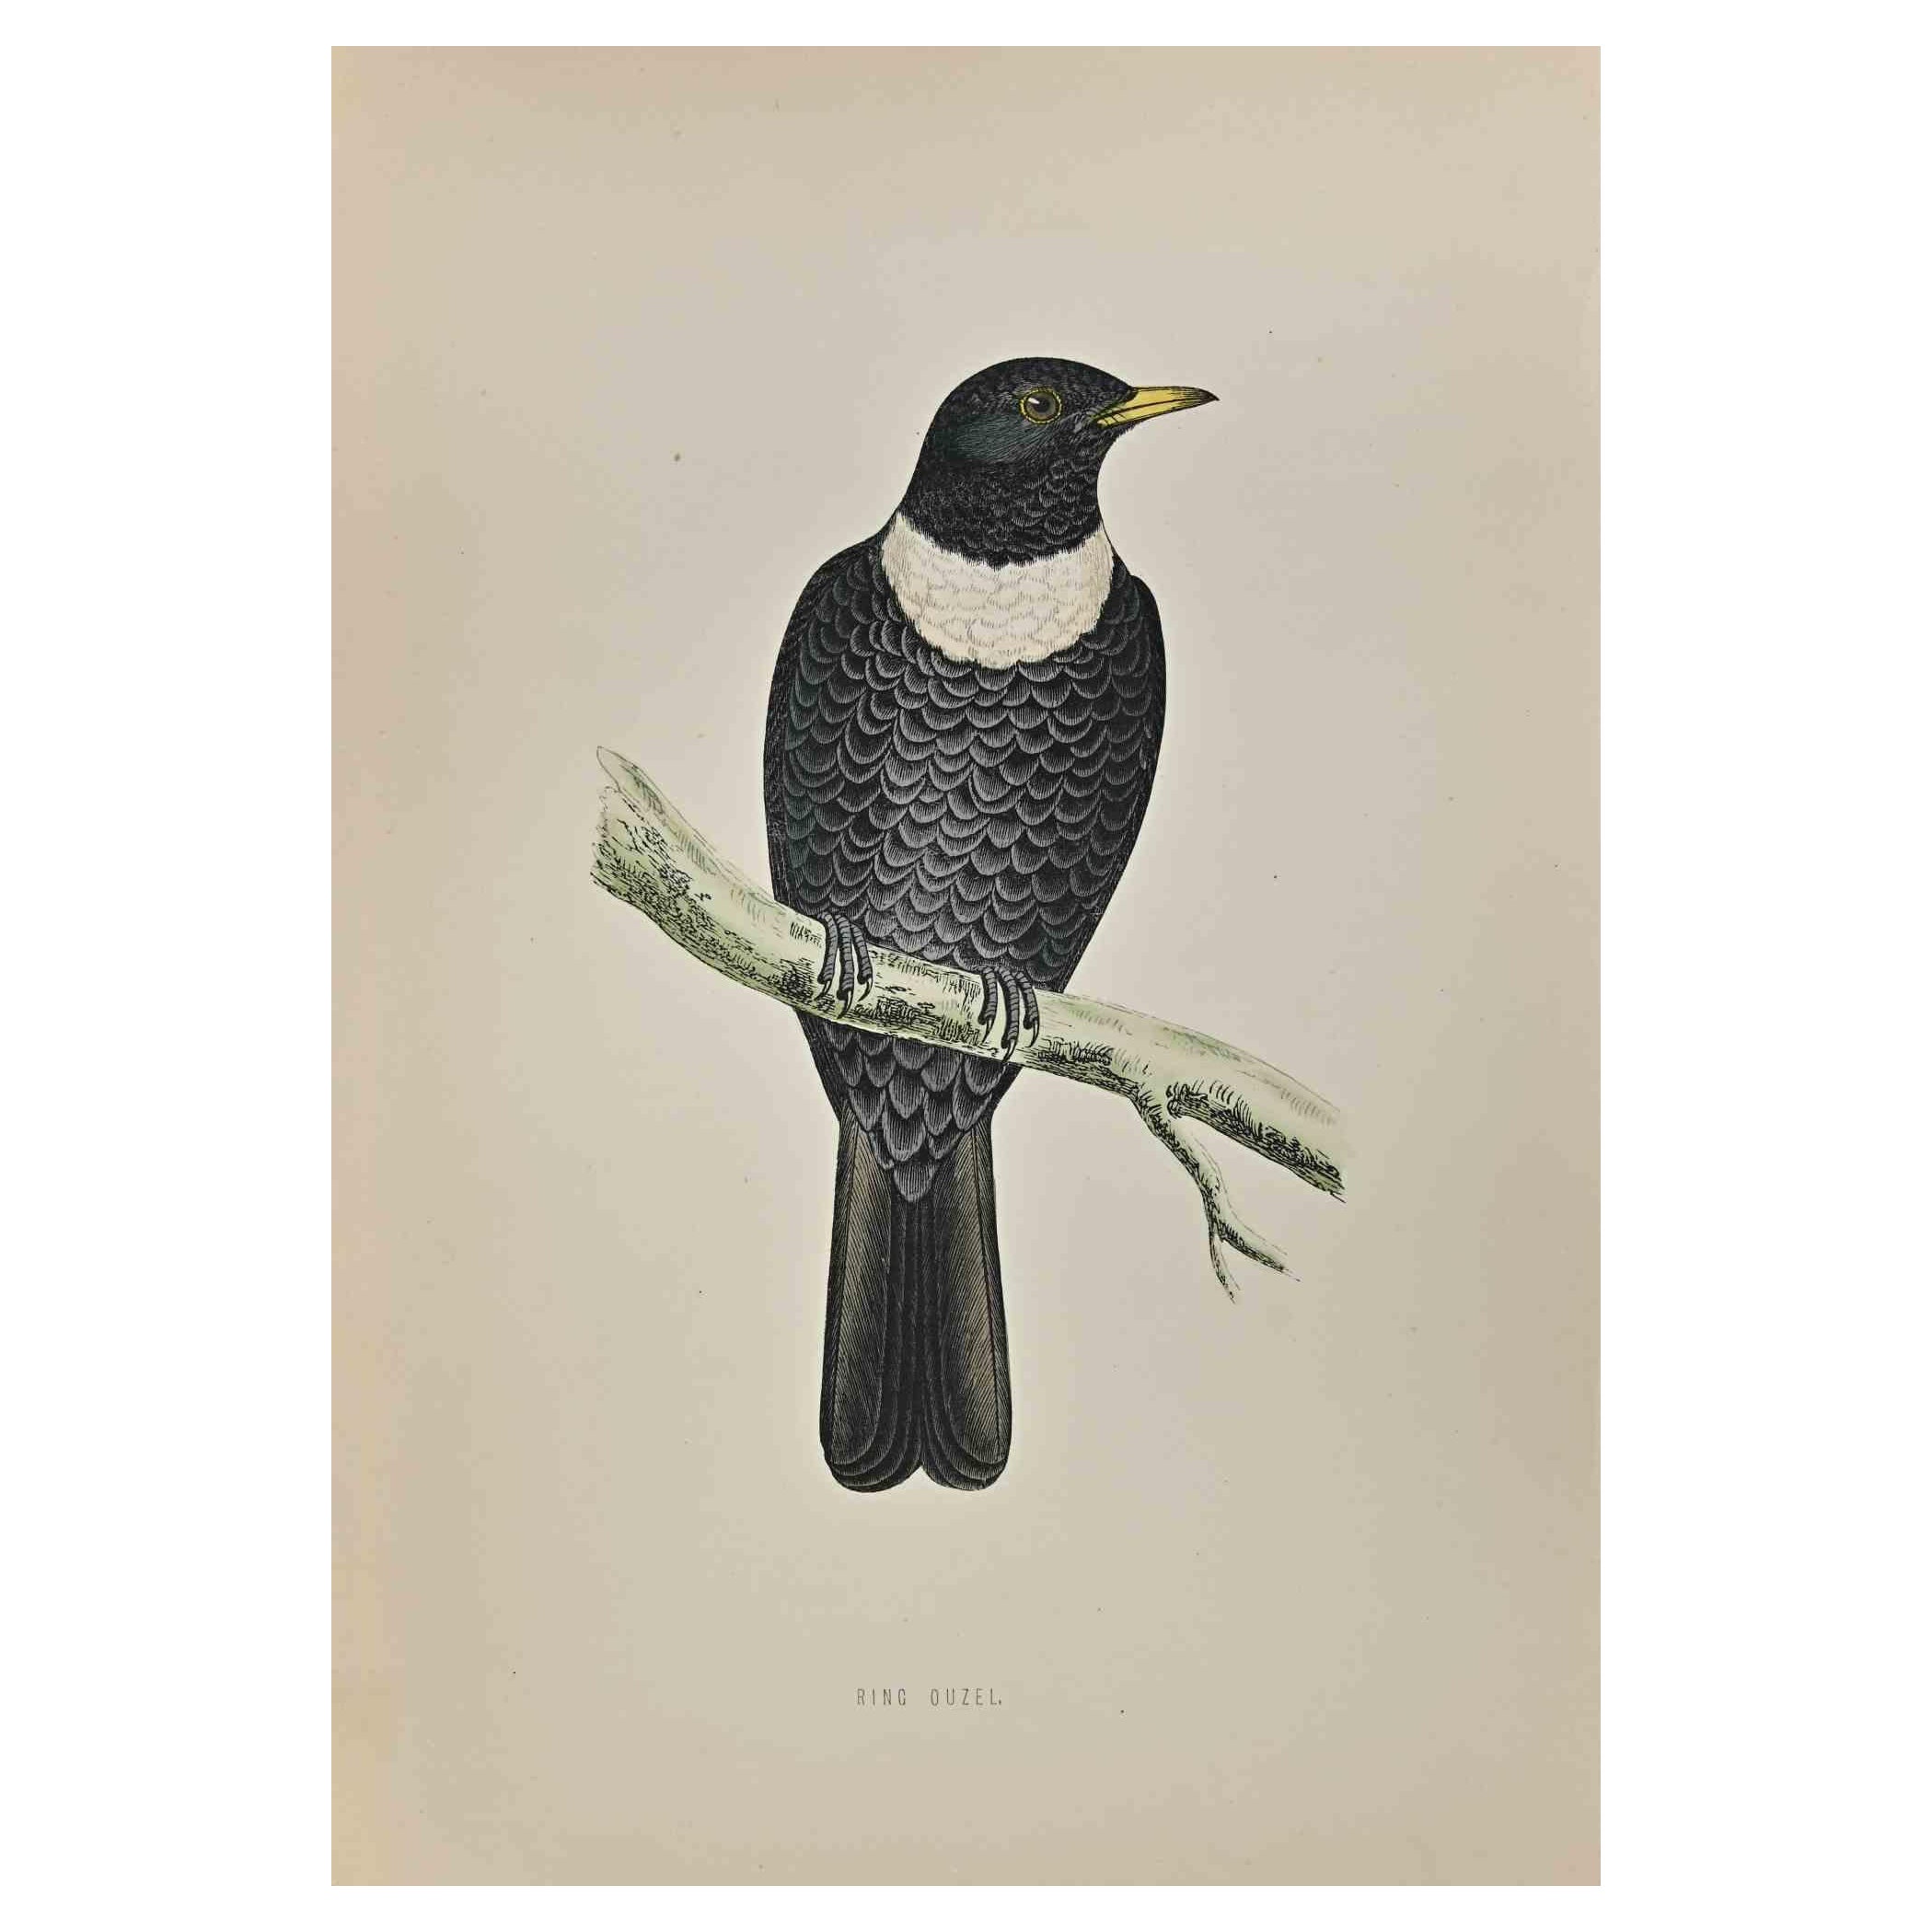  Ring Ouzel is a modern artwork realized in 1870 by the British artist Alexander Francis Lydon (1836-1917) . 

Woodcut print, hand colored, published by London, Bell & Sons, 1870.  Name of the bird printed in plate. This work is part of a print